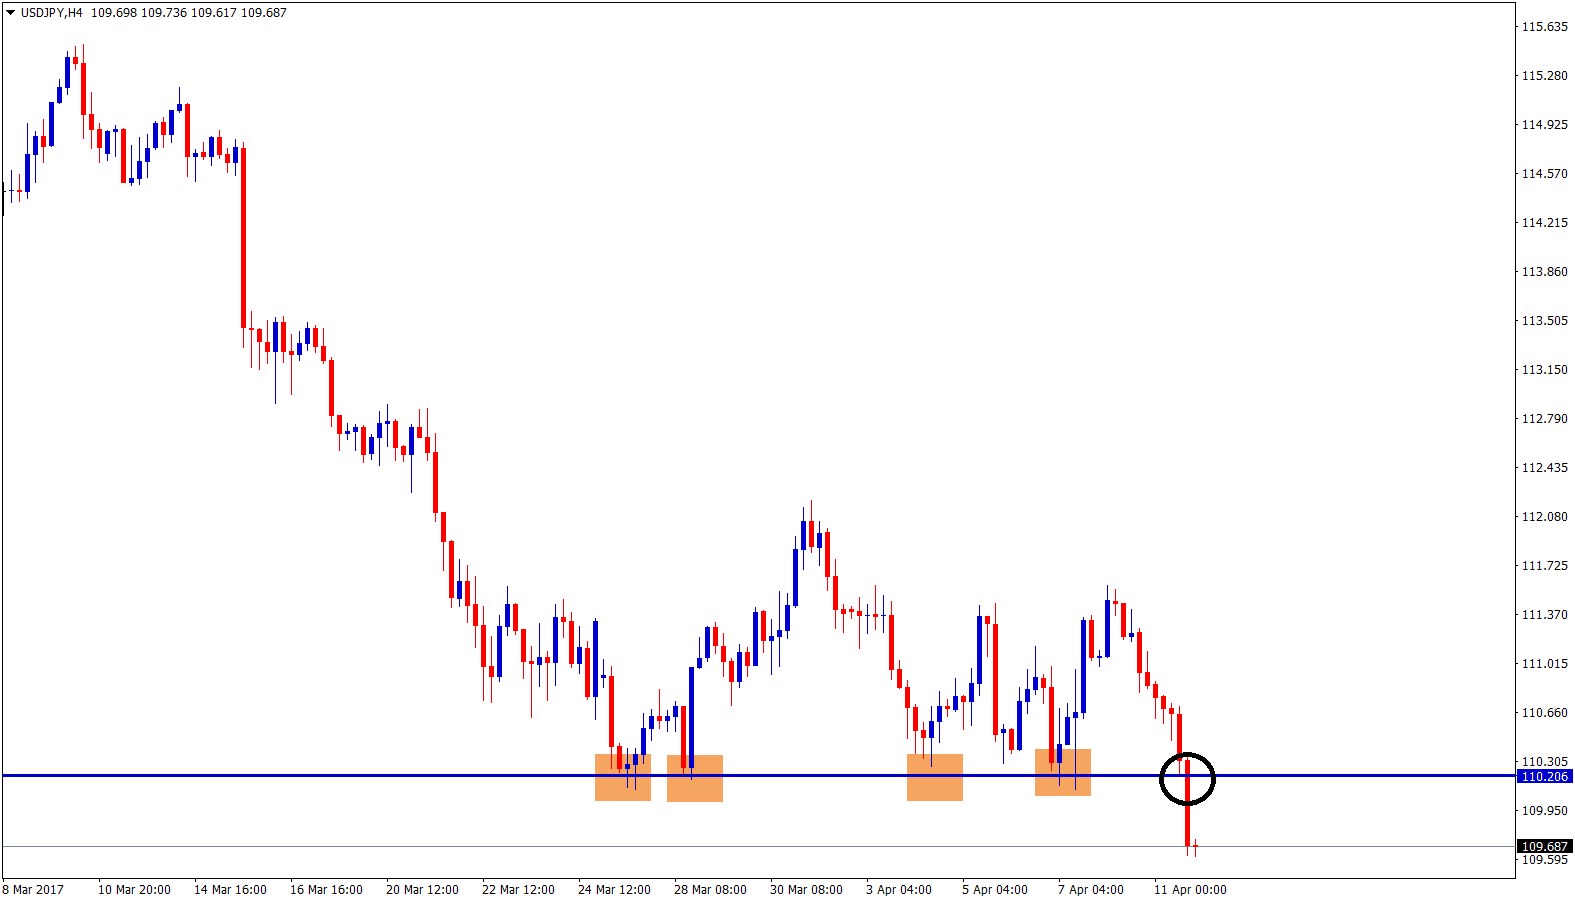 A big bear candle confirms breakout at support